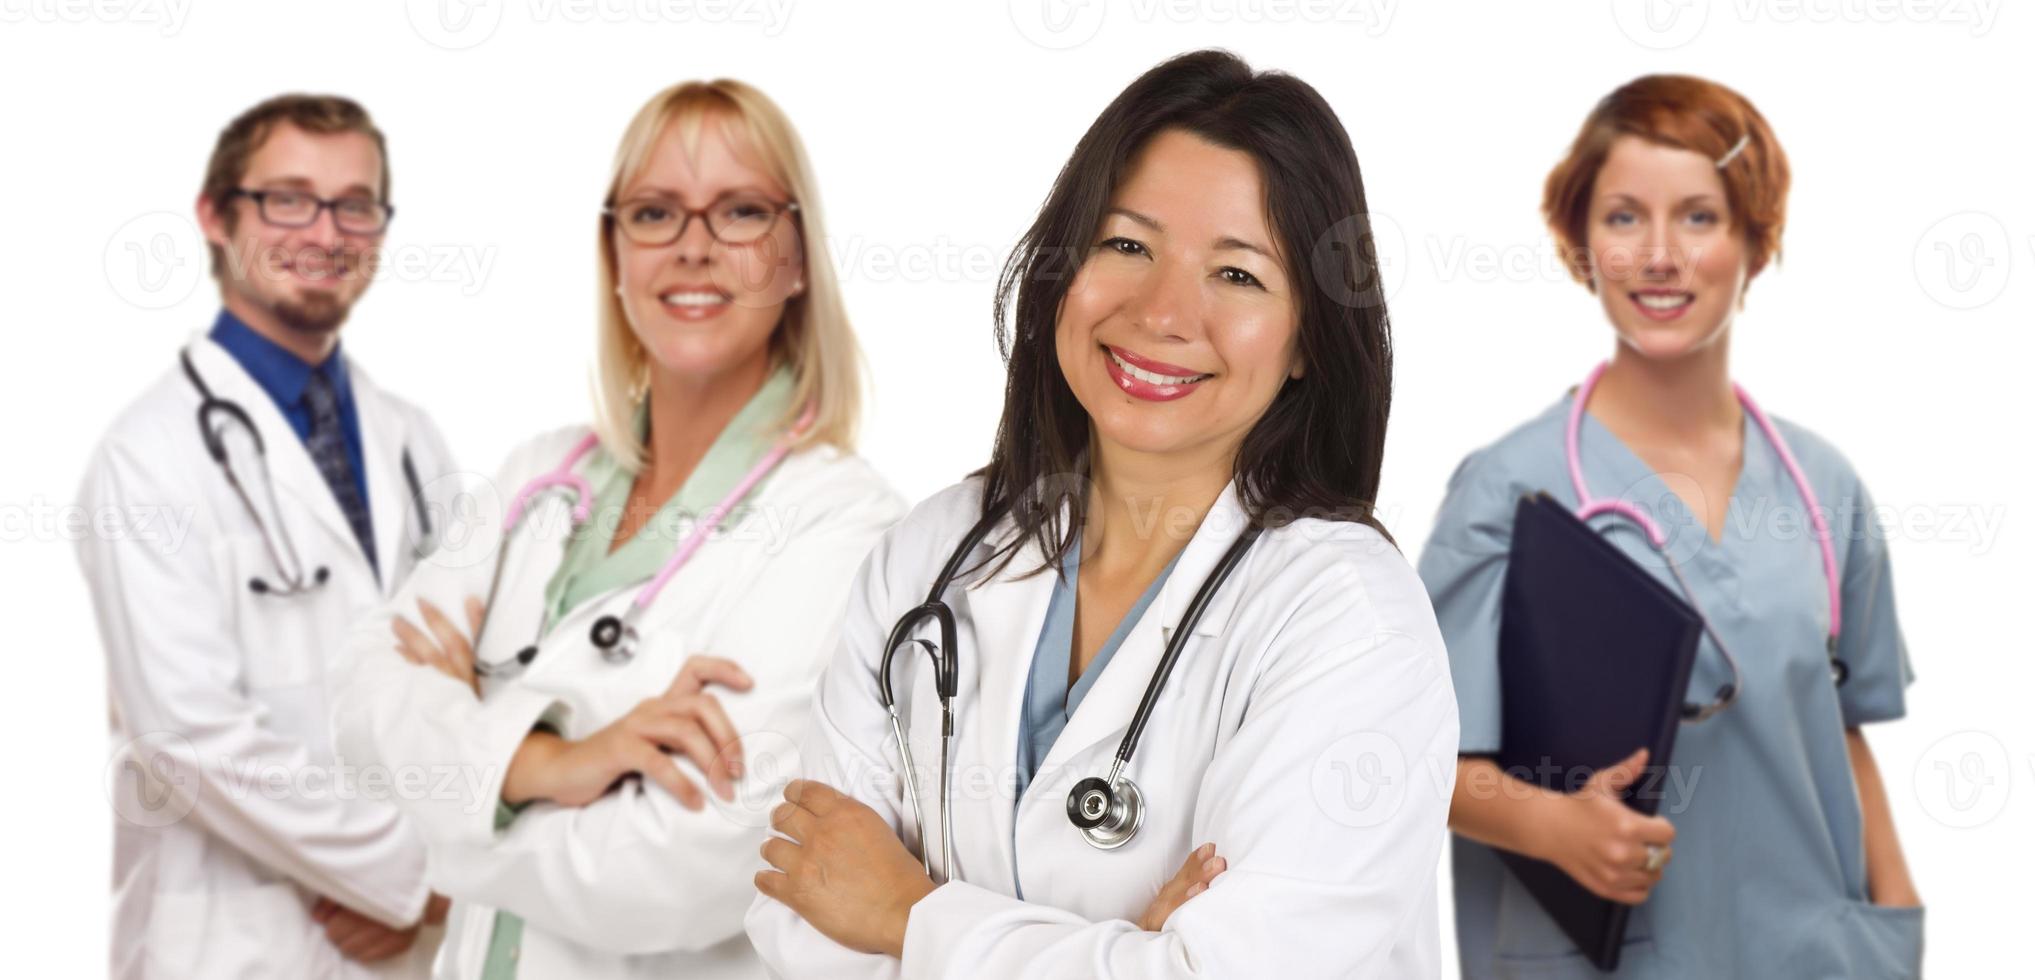 Group of Doctors or Nurses on a White Background photo